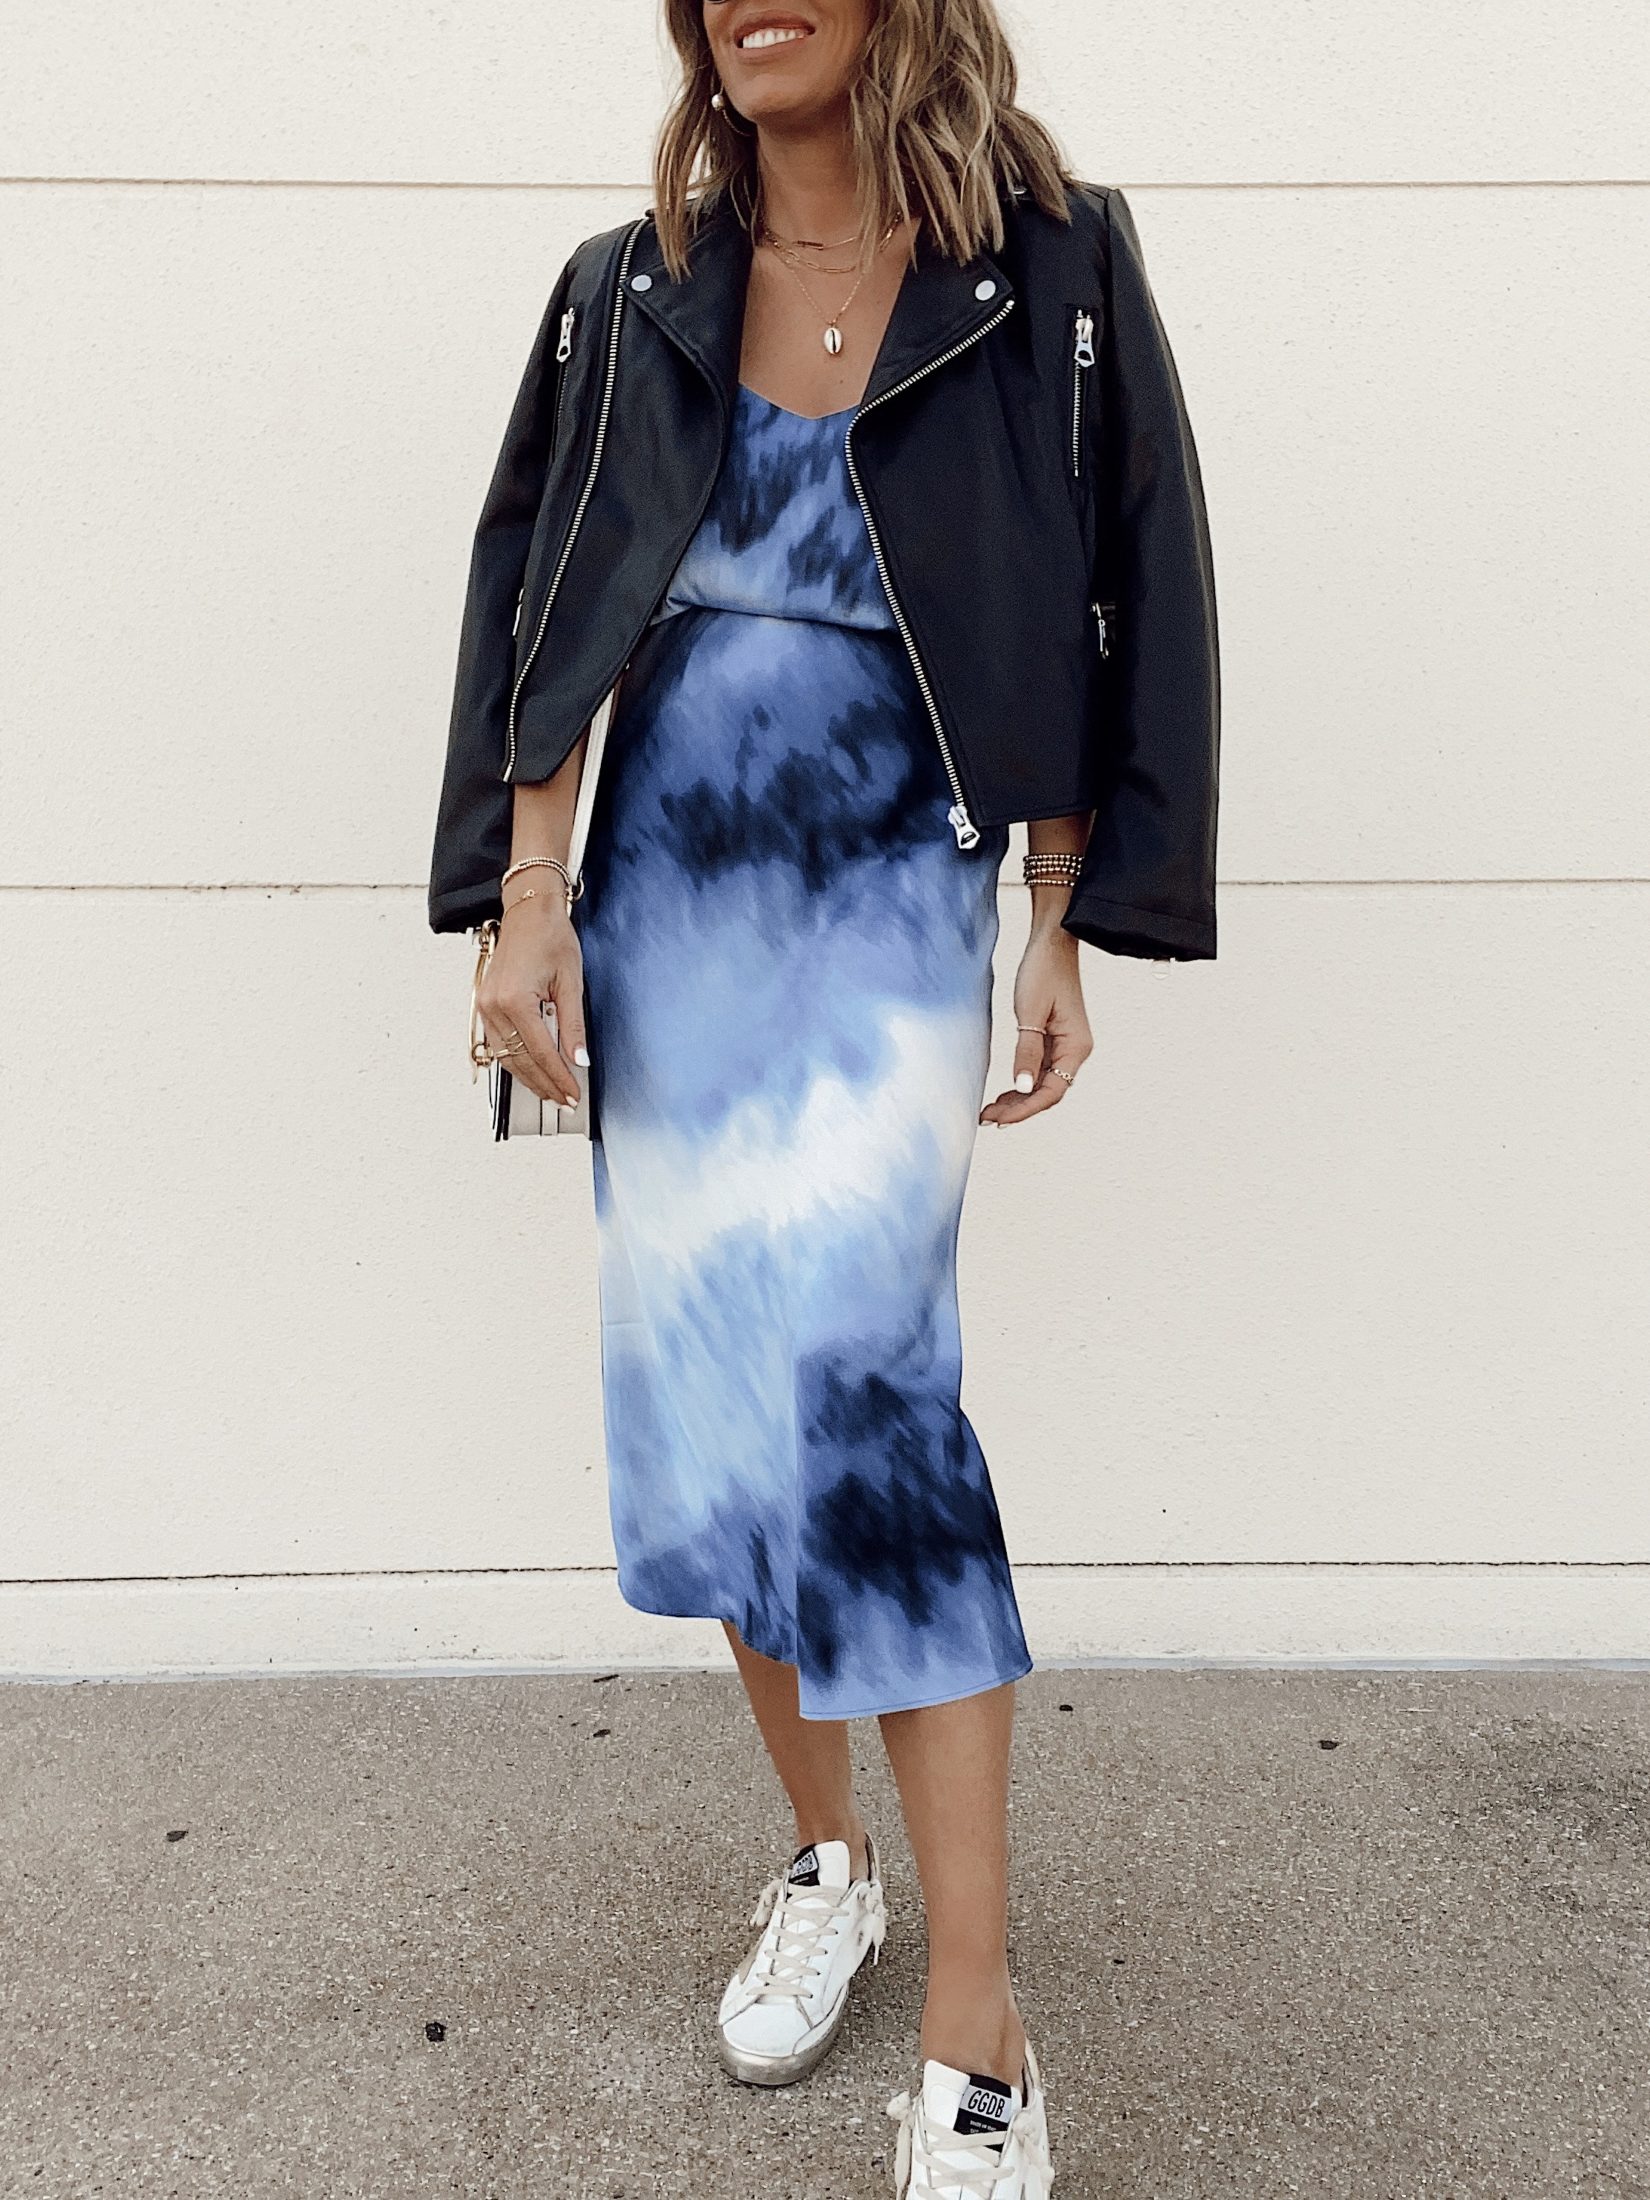 Walmart scoop blue ombre tie dye print cami top with matching slip skirt with black faux leather jacket